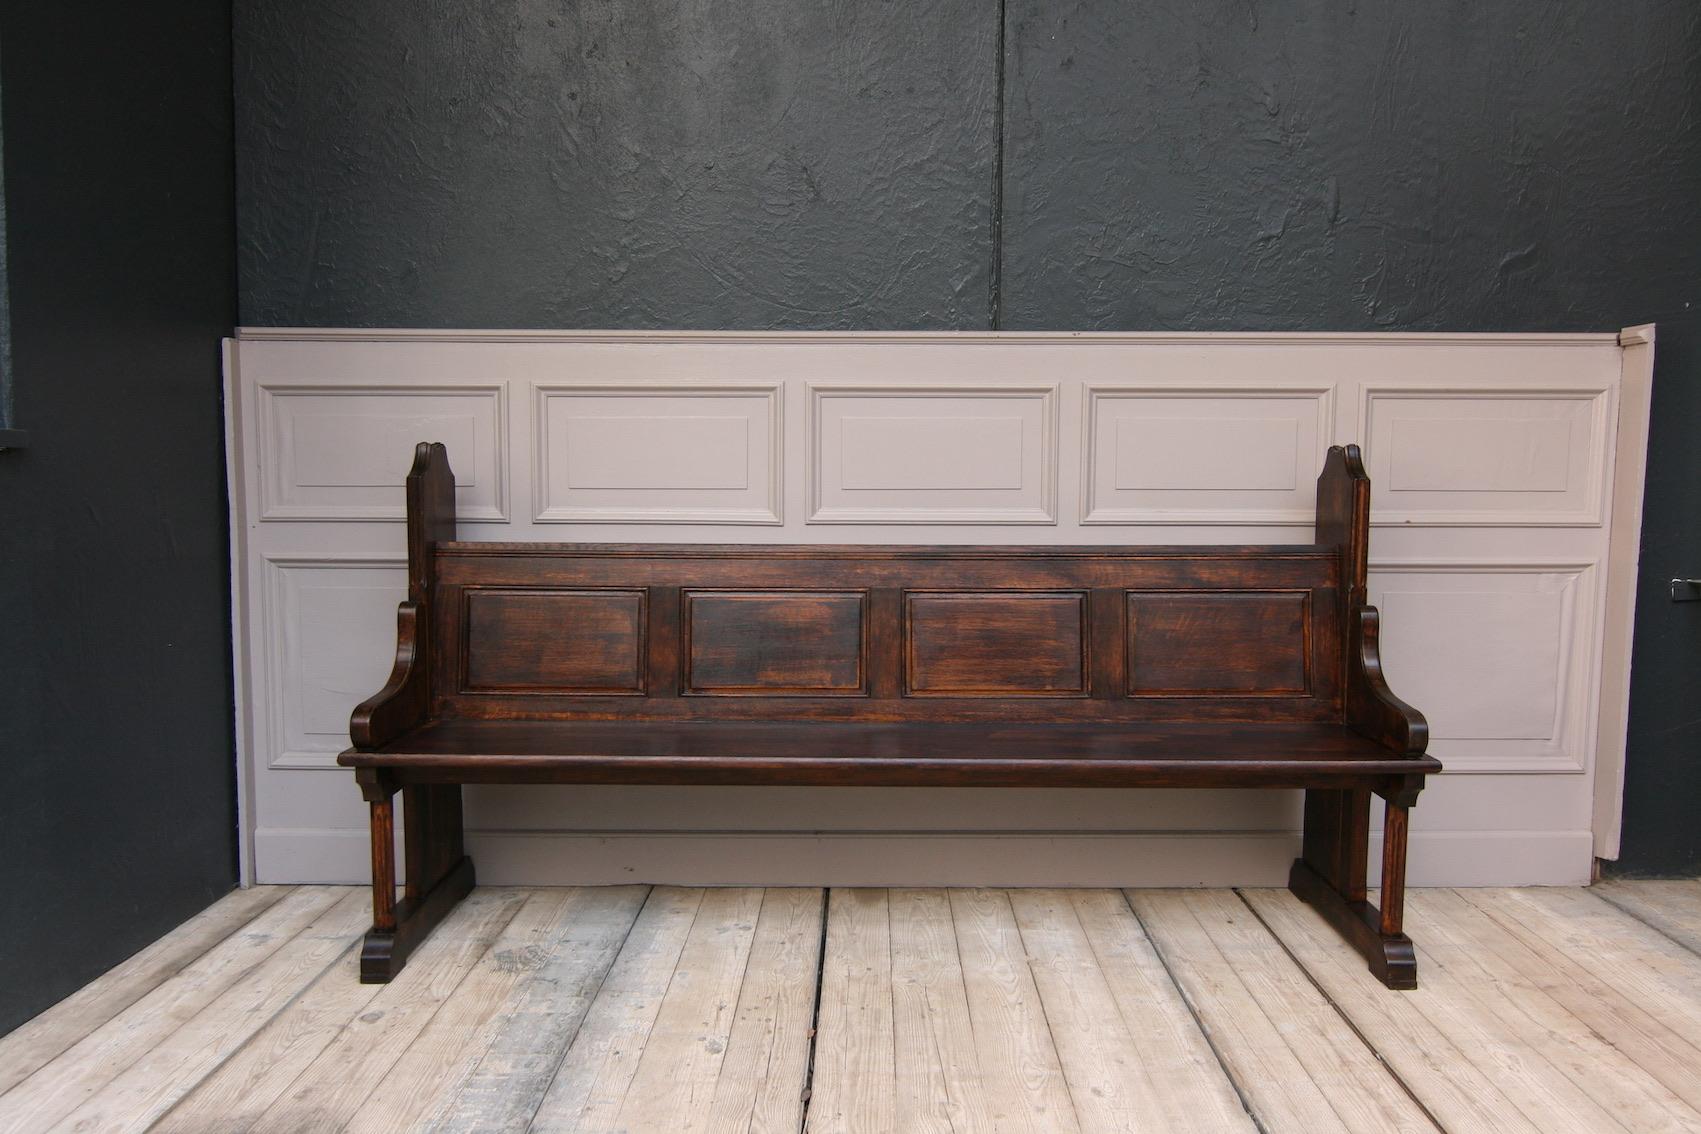 Set of 4 (4-seat) church pews from the 